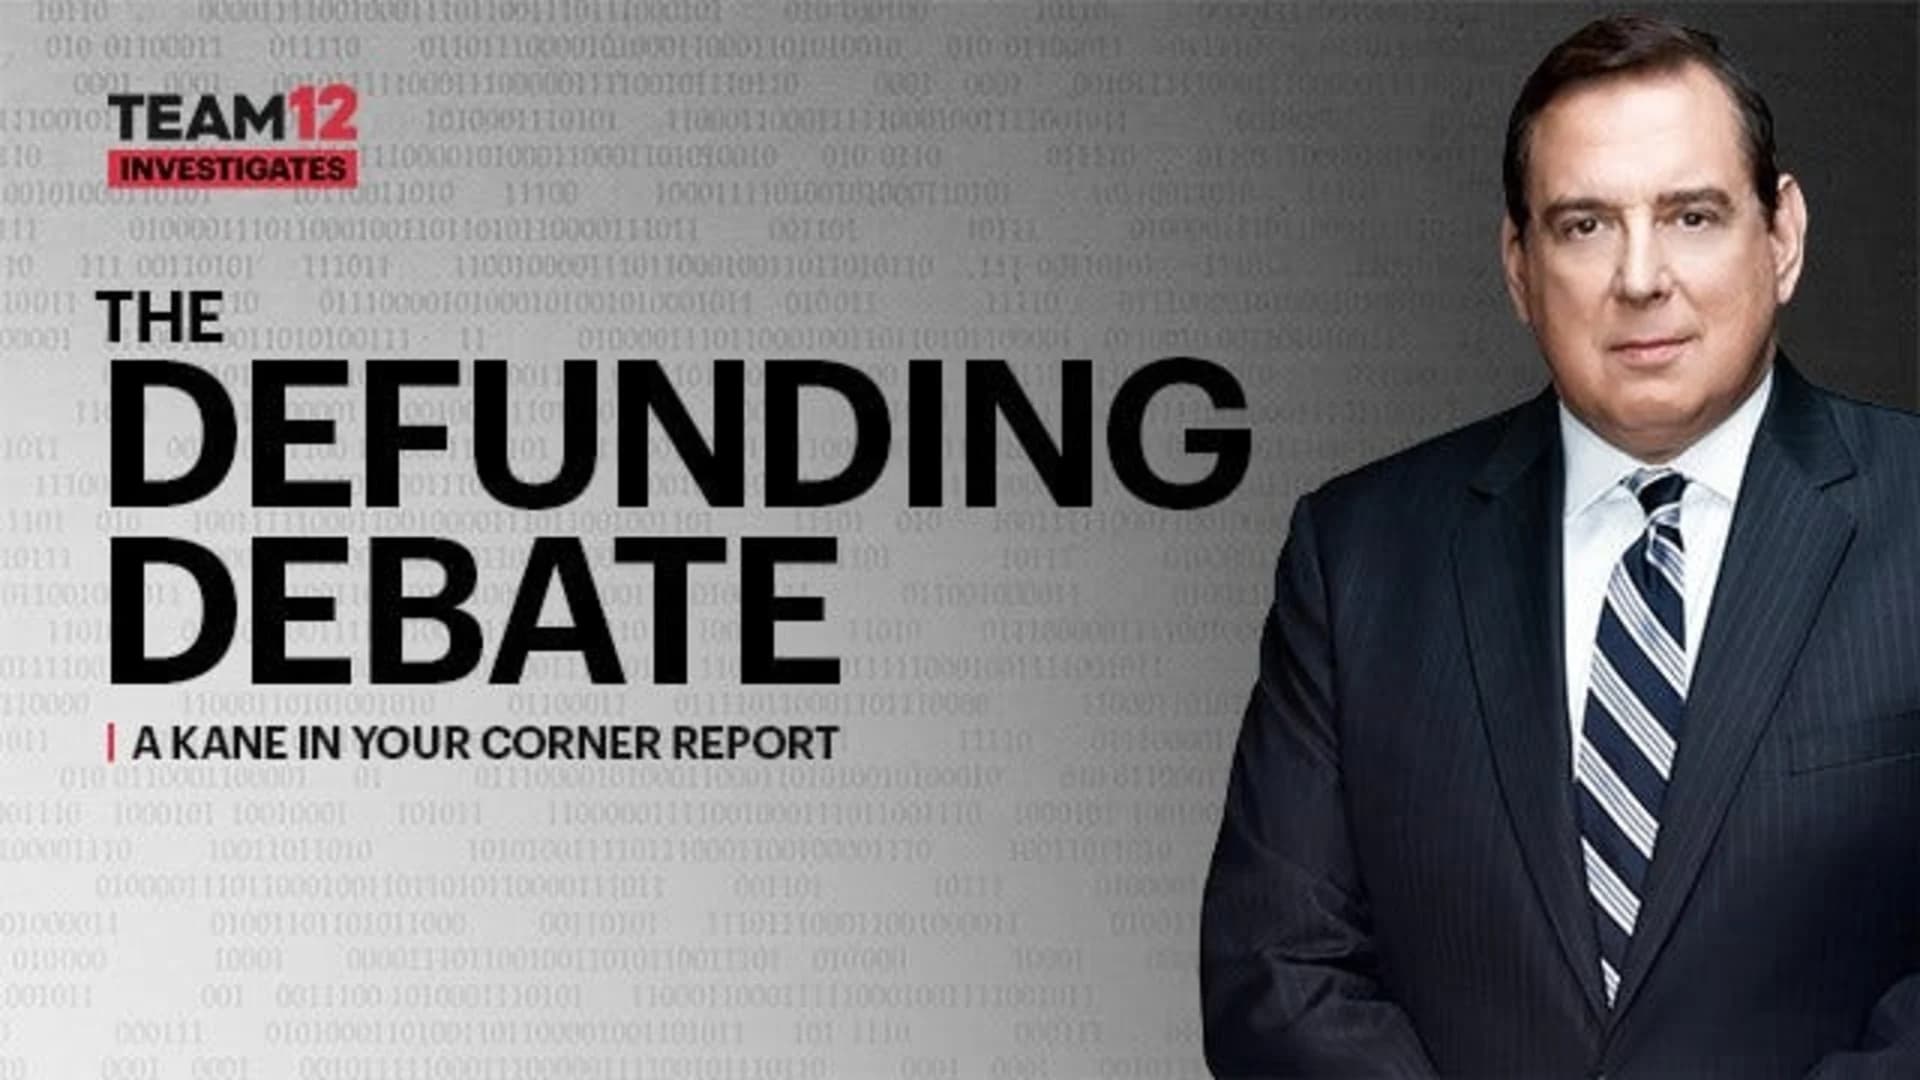 The Defunding Debate: A Kane in Your Corner special report